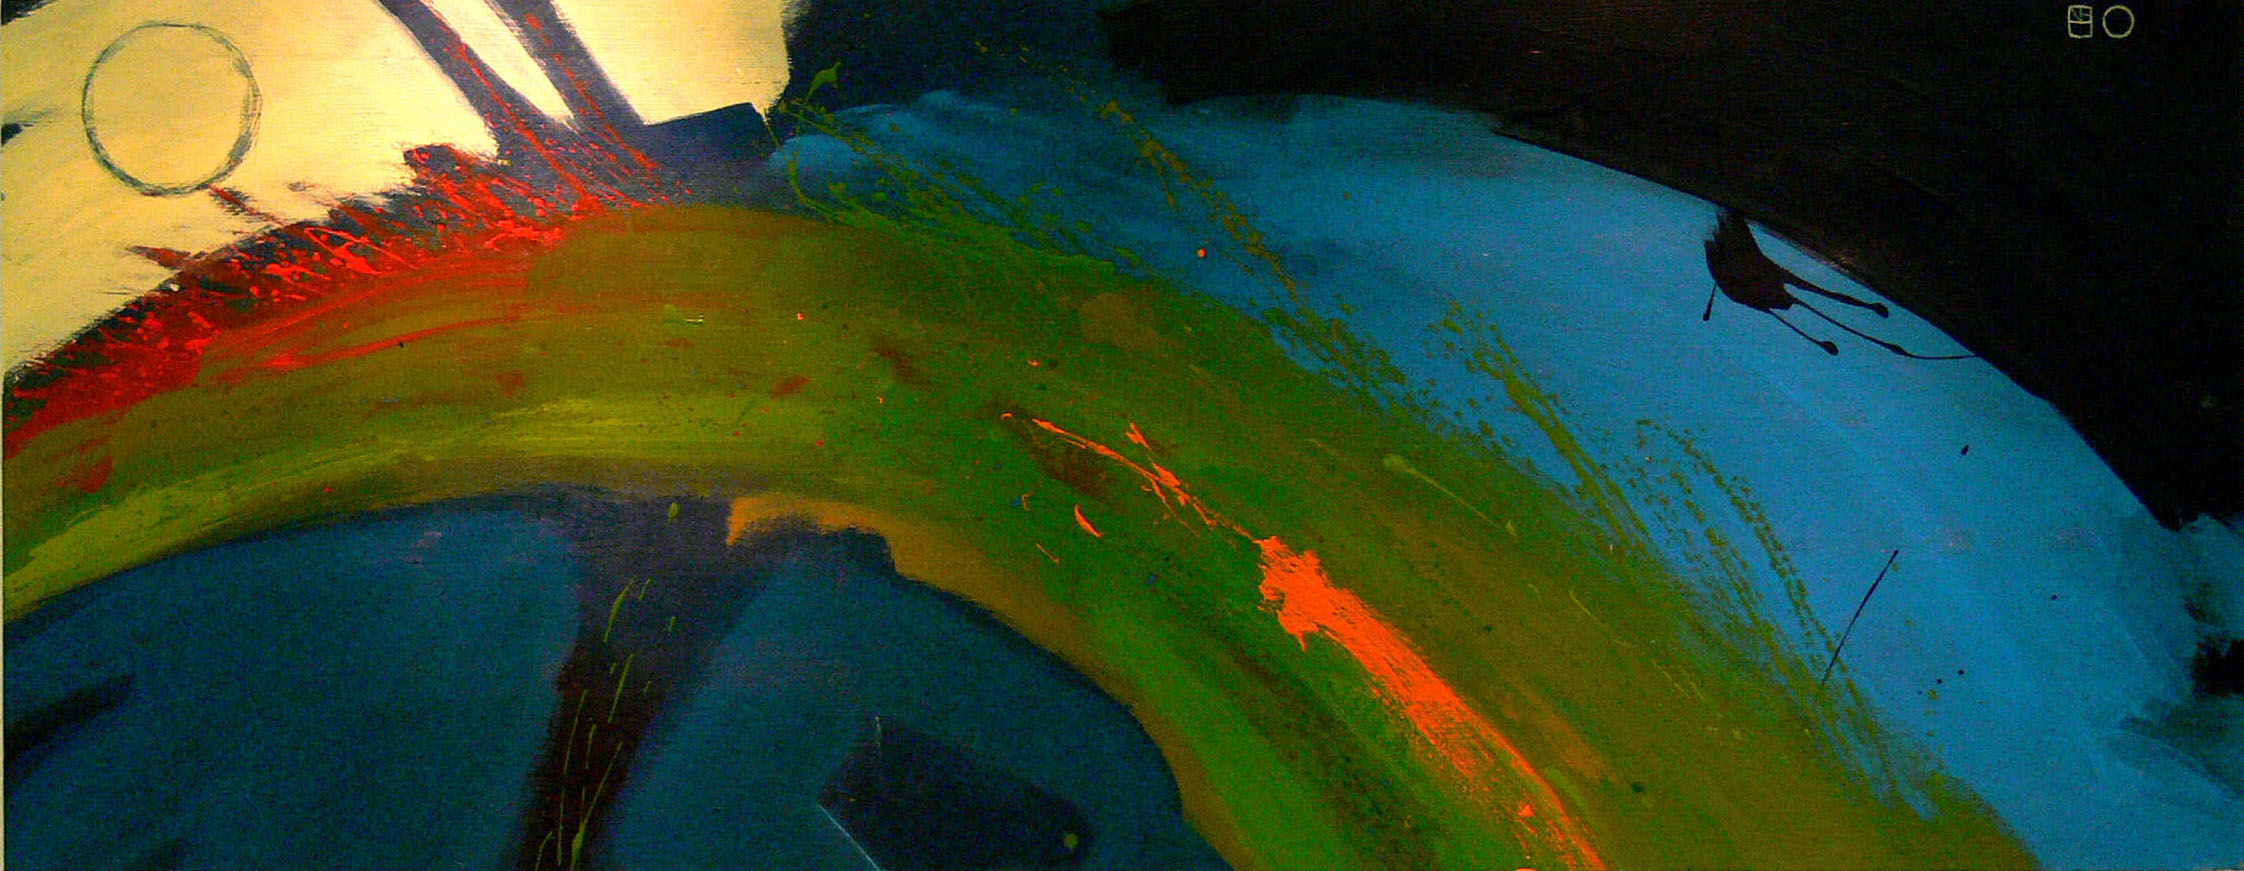 WEB PAGE PAINTING CROPPED.jpg